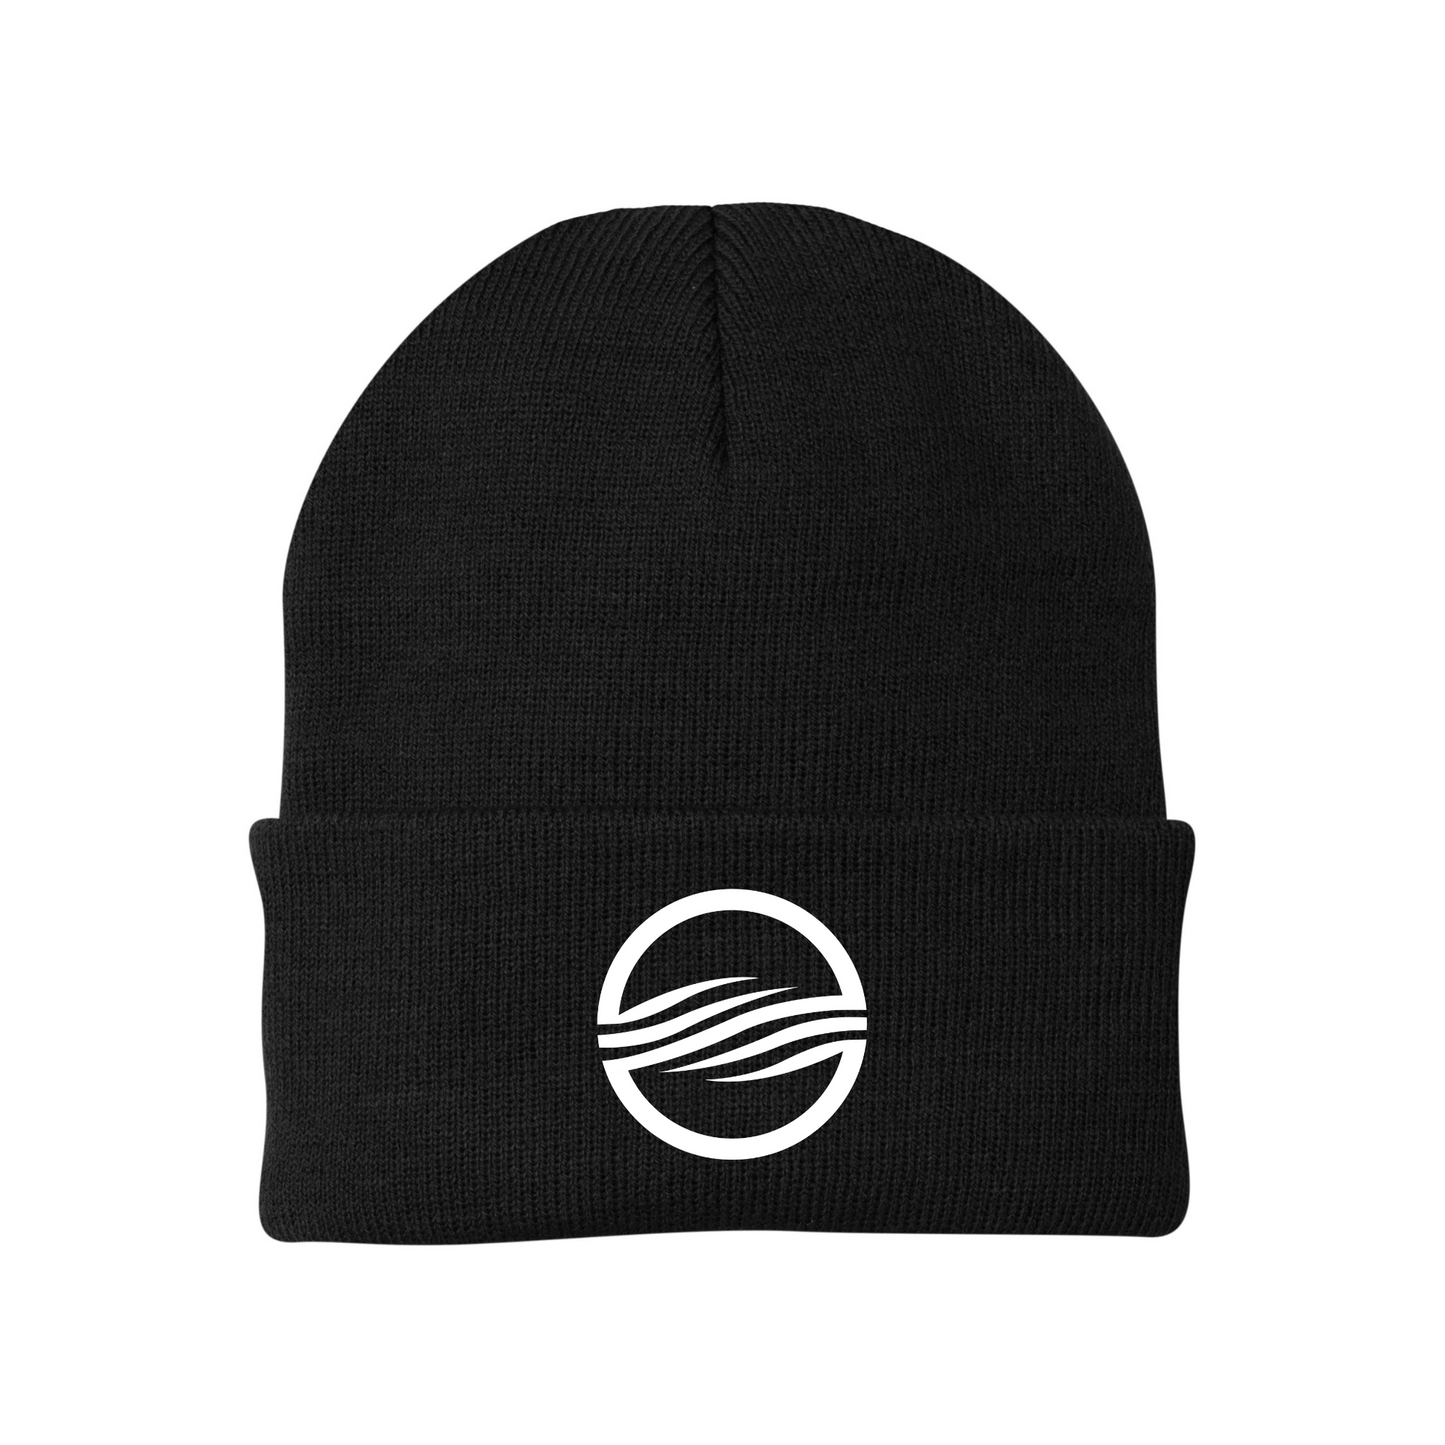 Current Church Embroidered Beanie